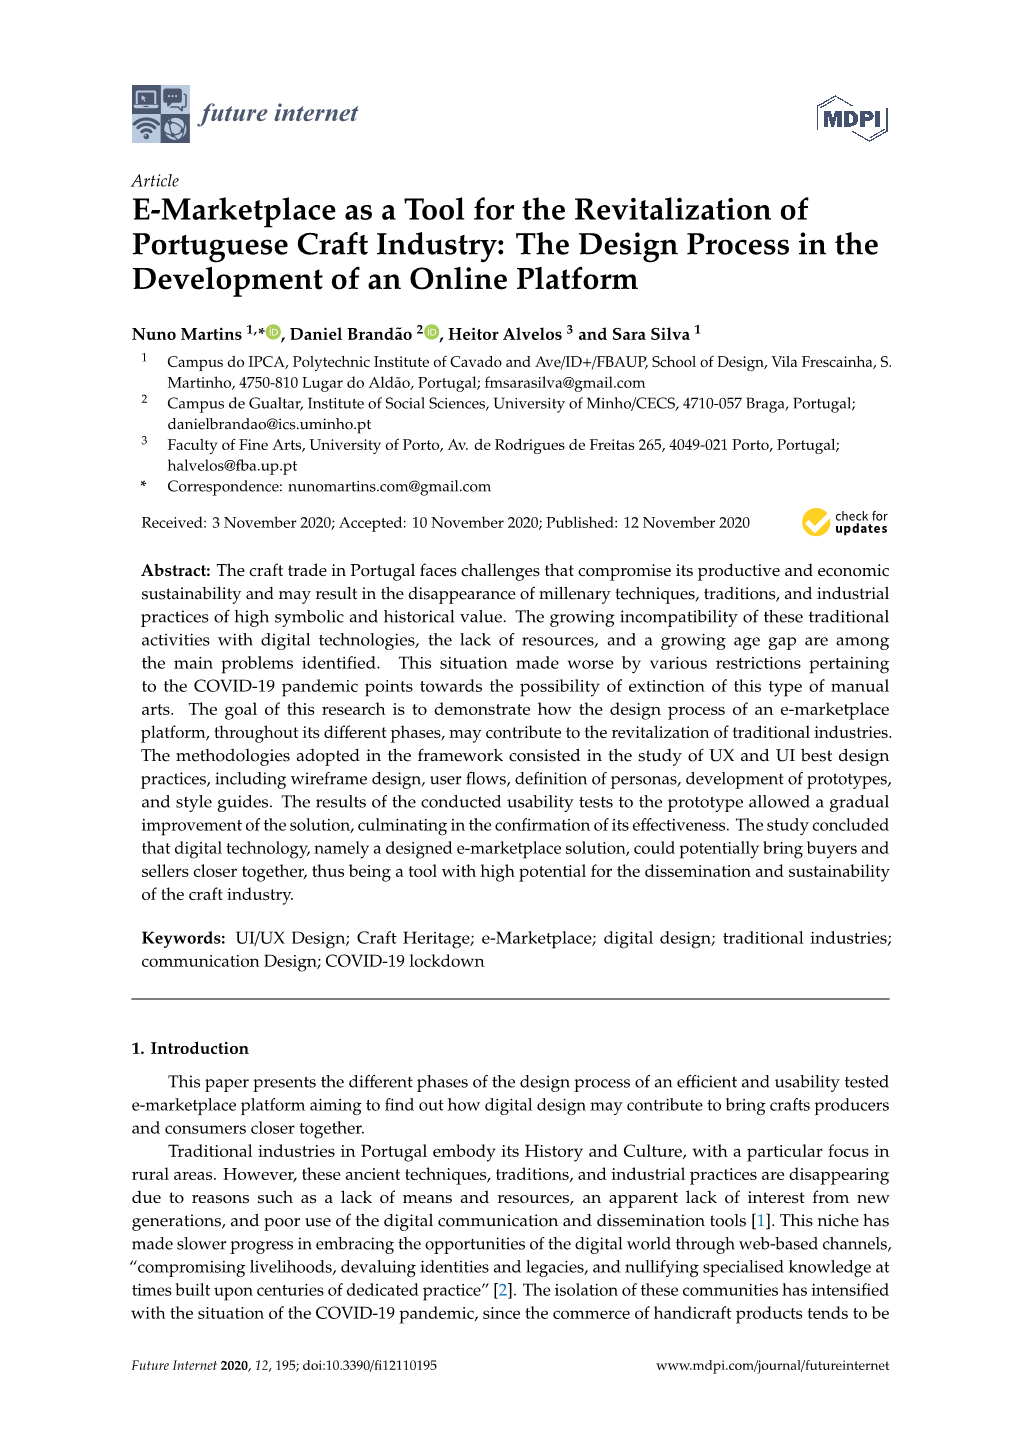 E-Marketplace As a Tool for the Revitalization of Portuguese Craft Industry: the Design Process in the Development of an Online Platform